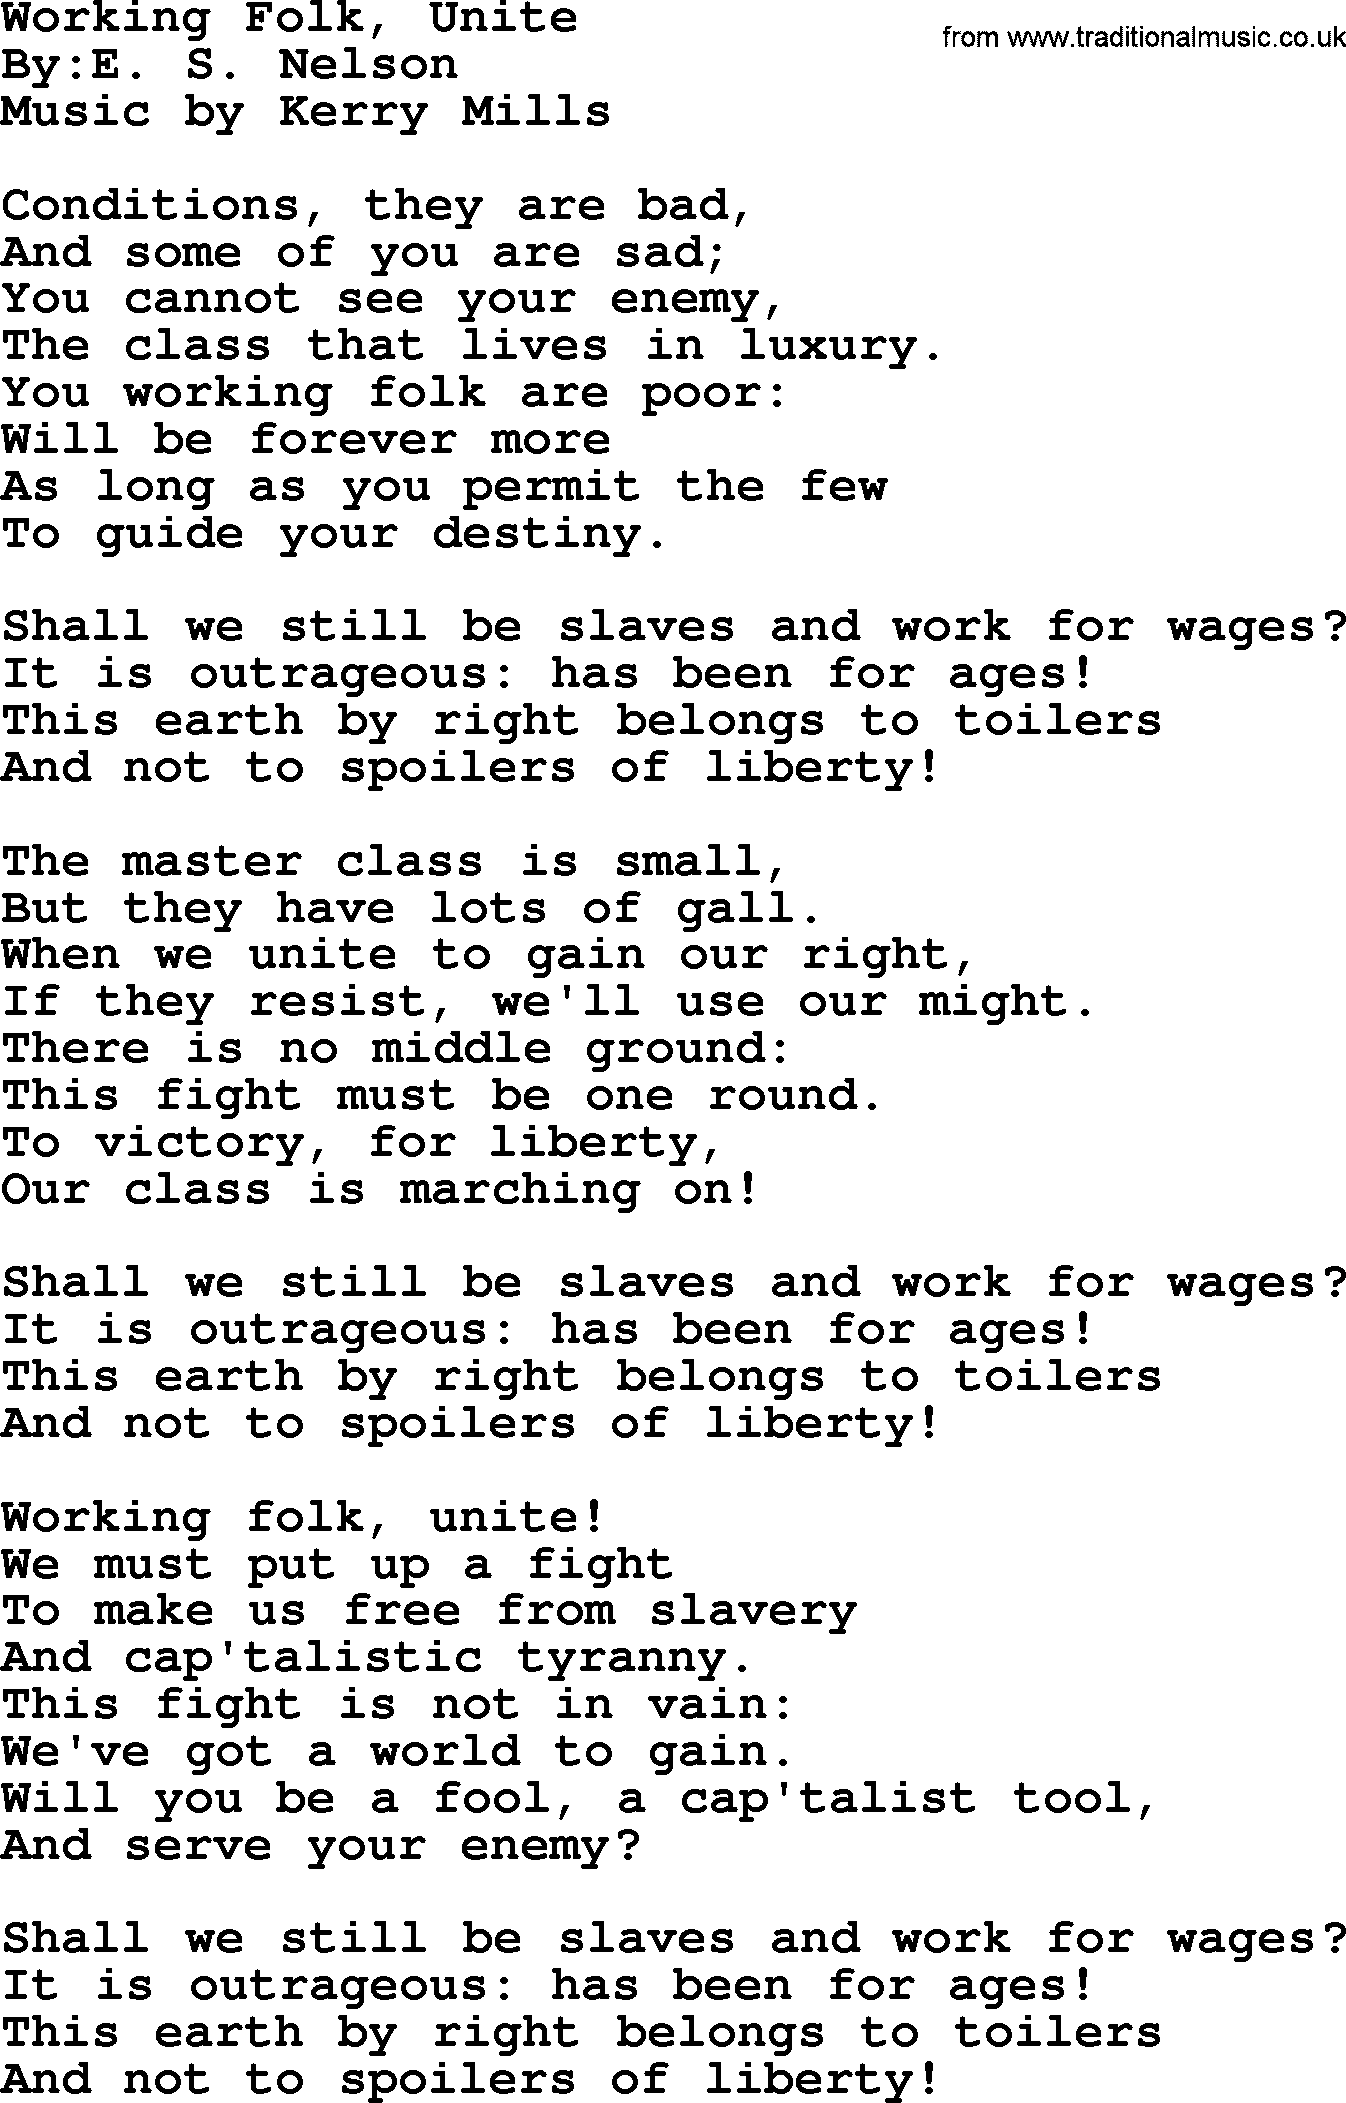 Political, Solidarity, Workers or Union song: Working Folk Unite, lyrics